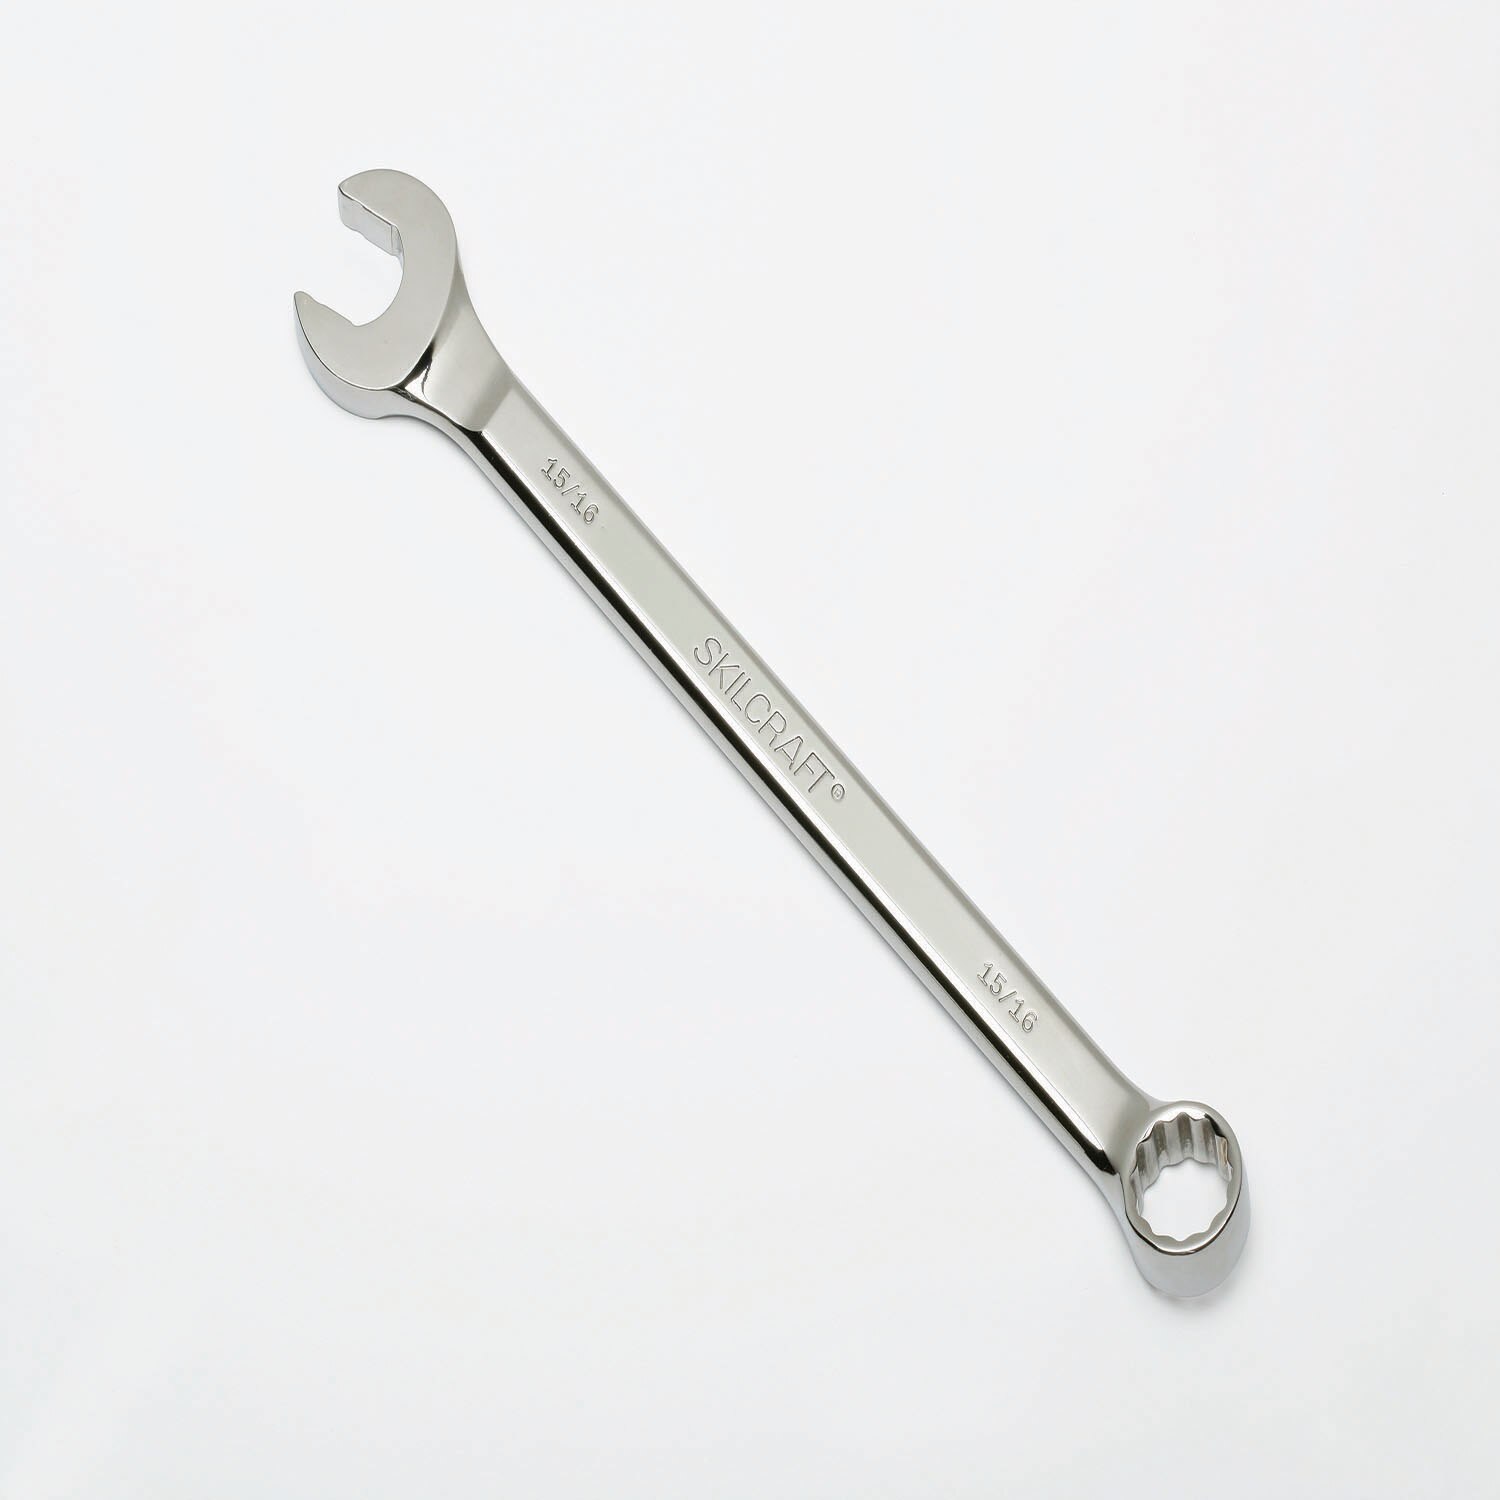 Wrench, Combination, Chrome, 12 Pt, 5/16"